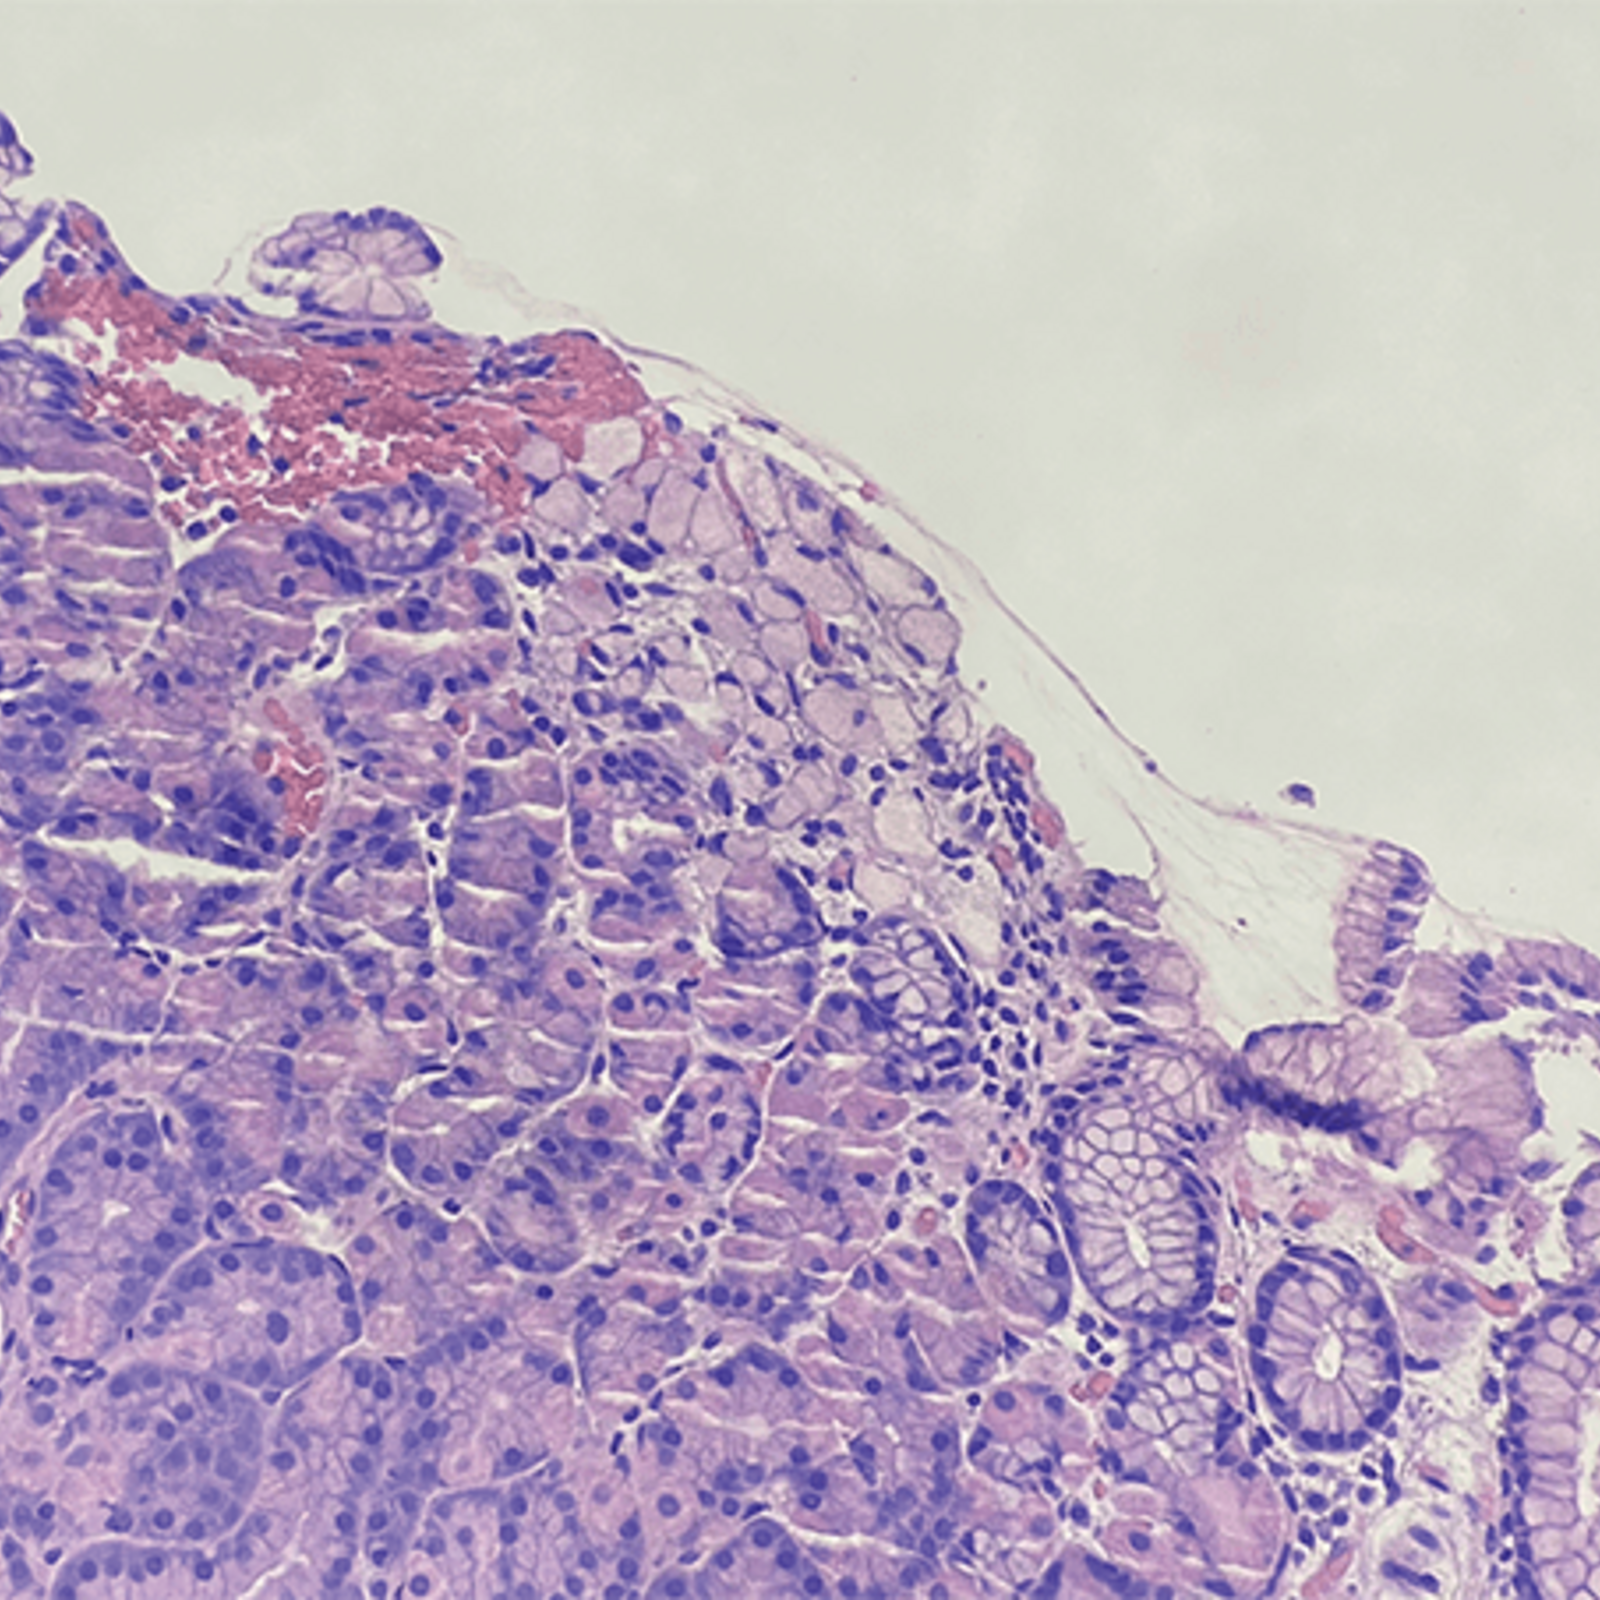 Signet-Ring Cell Carcinoma Co-Existing with Adenocarcinoma of the